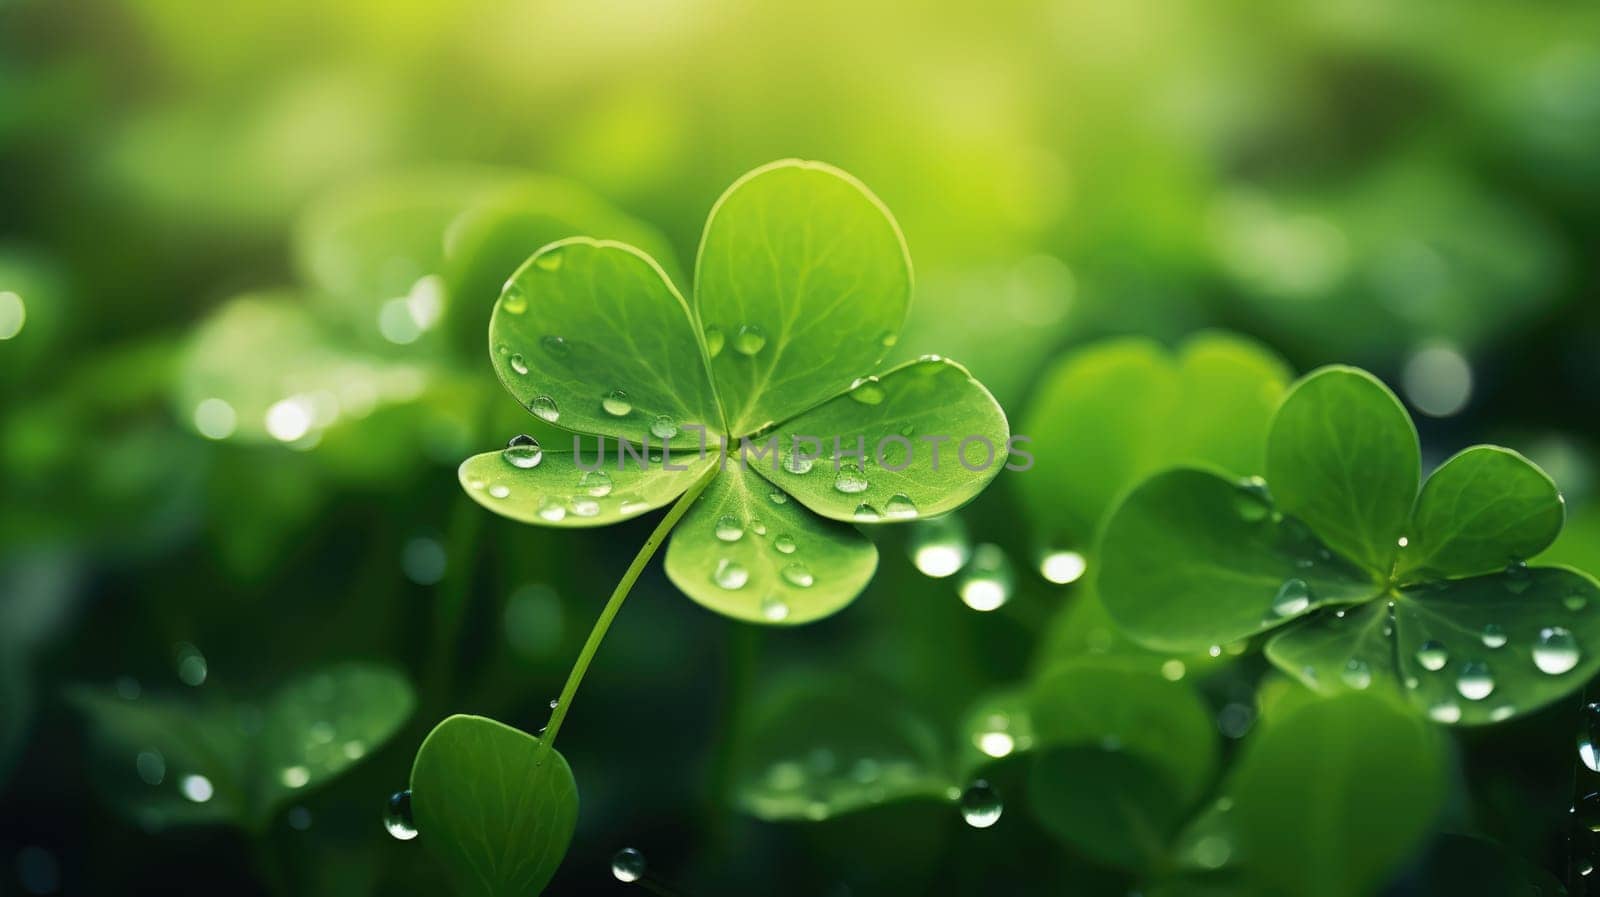 Macro view of green four-leaf clover with morning dew with blurred background, St. Patricks Day luck. by JuliaDorian